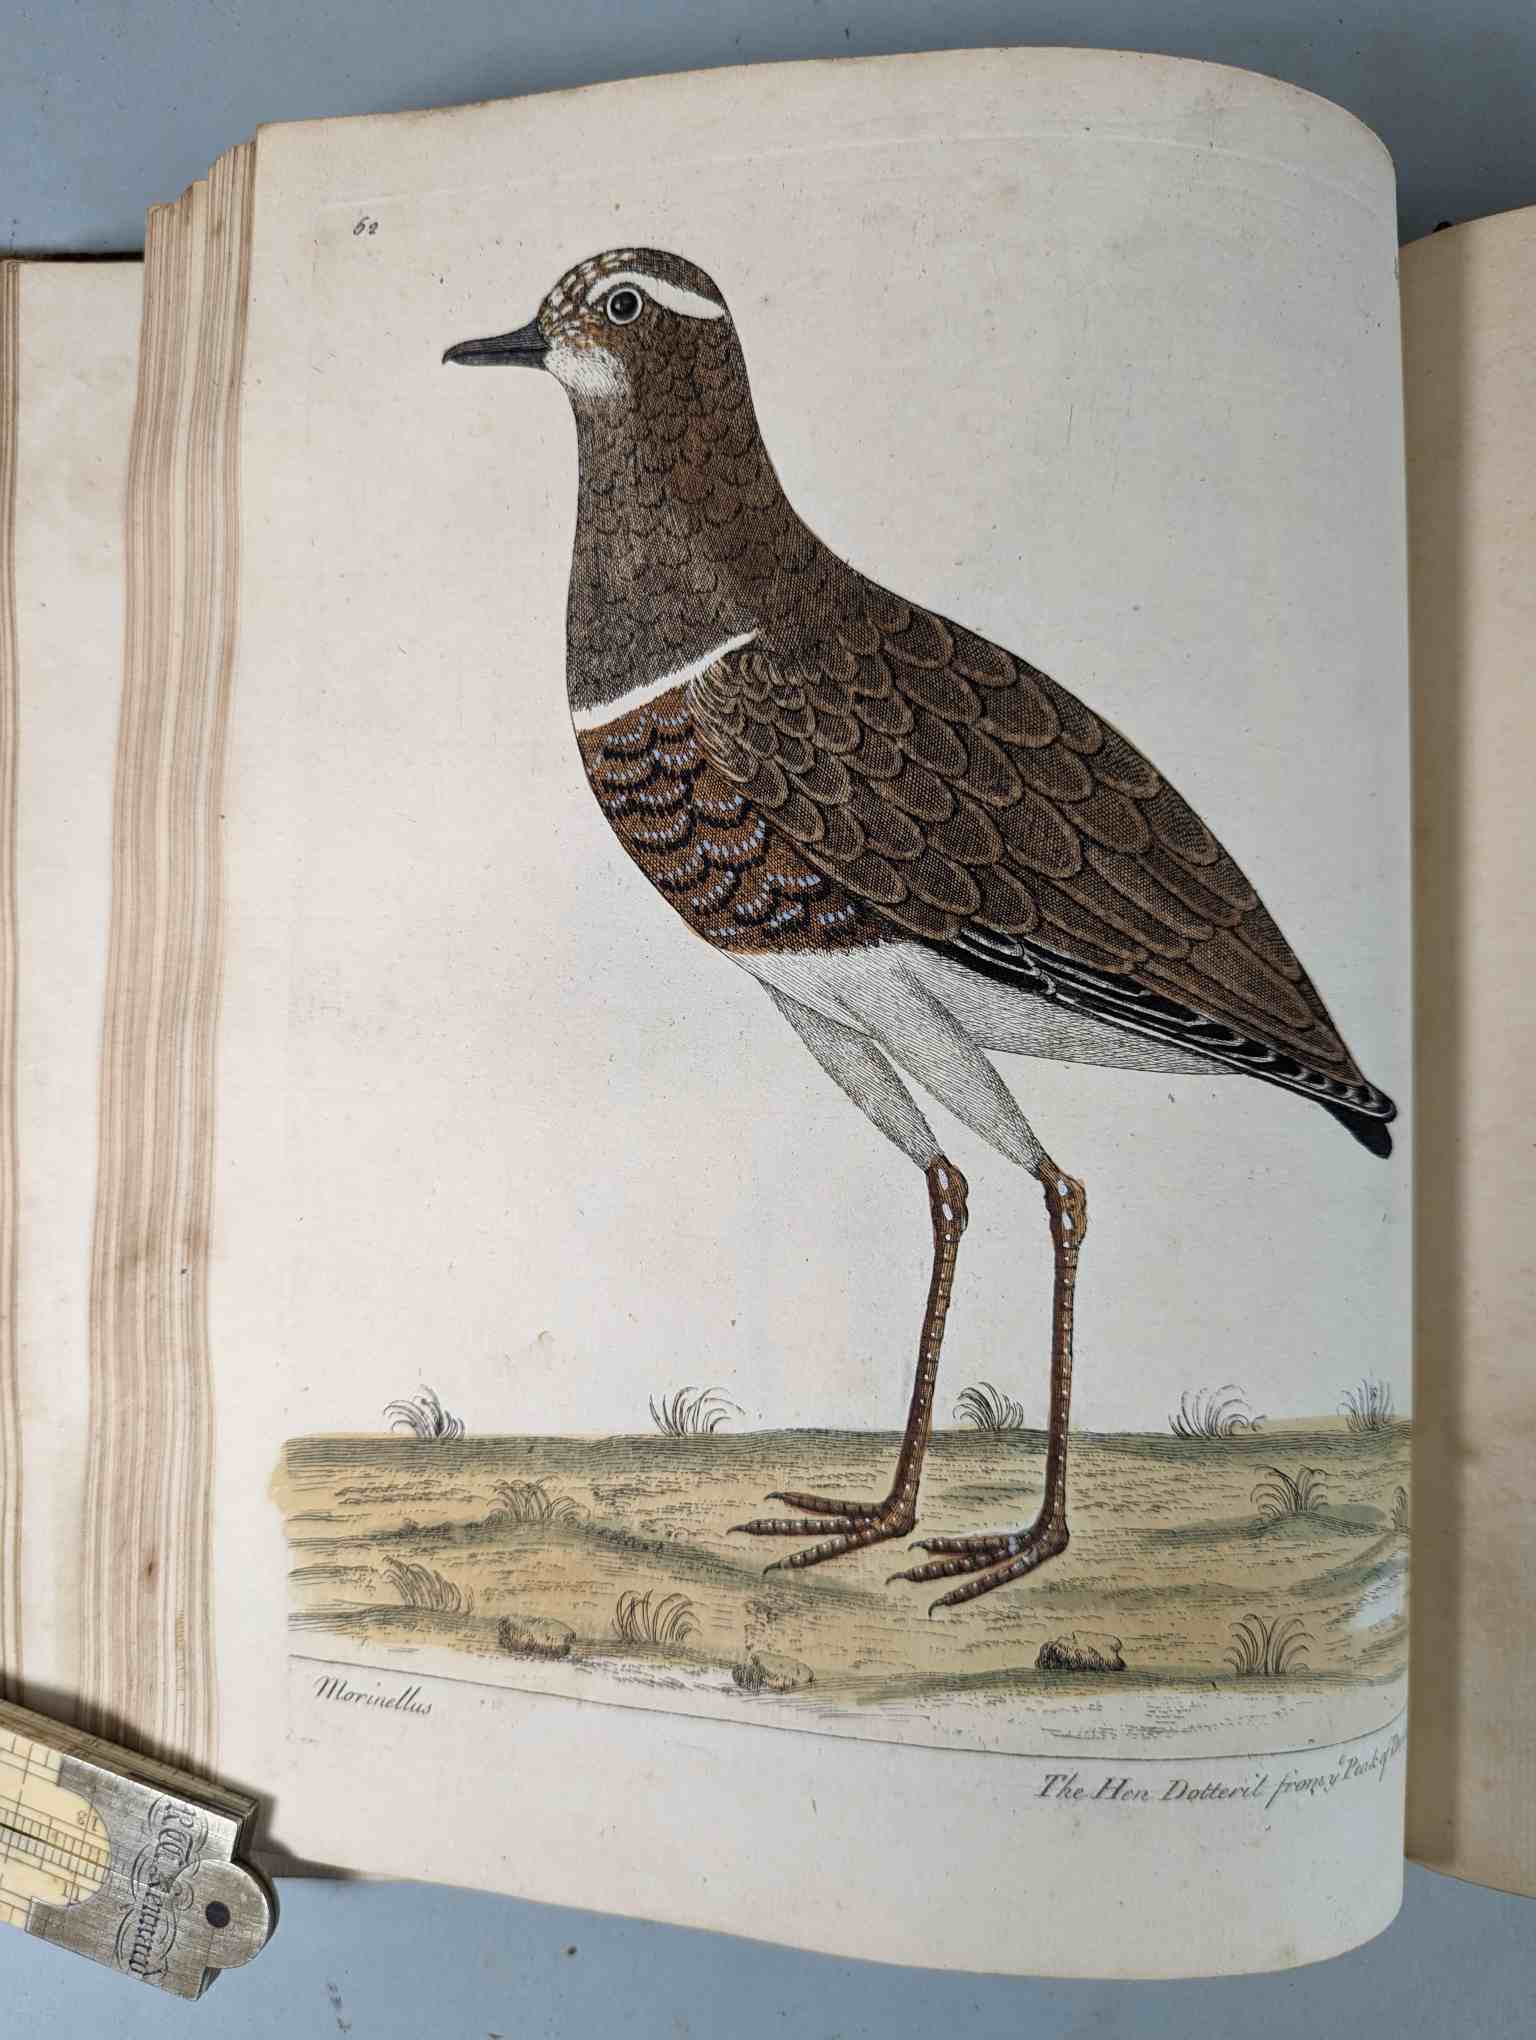 ALBIN, Eleazar. A Natural History of Birds, to which are added, Notes and Observations by W. - Image 166 of 208